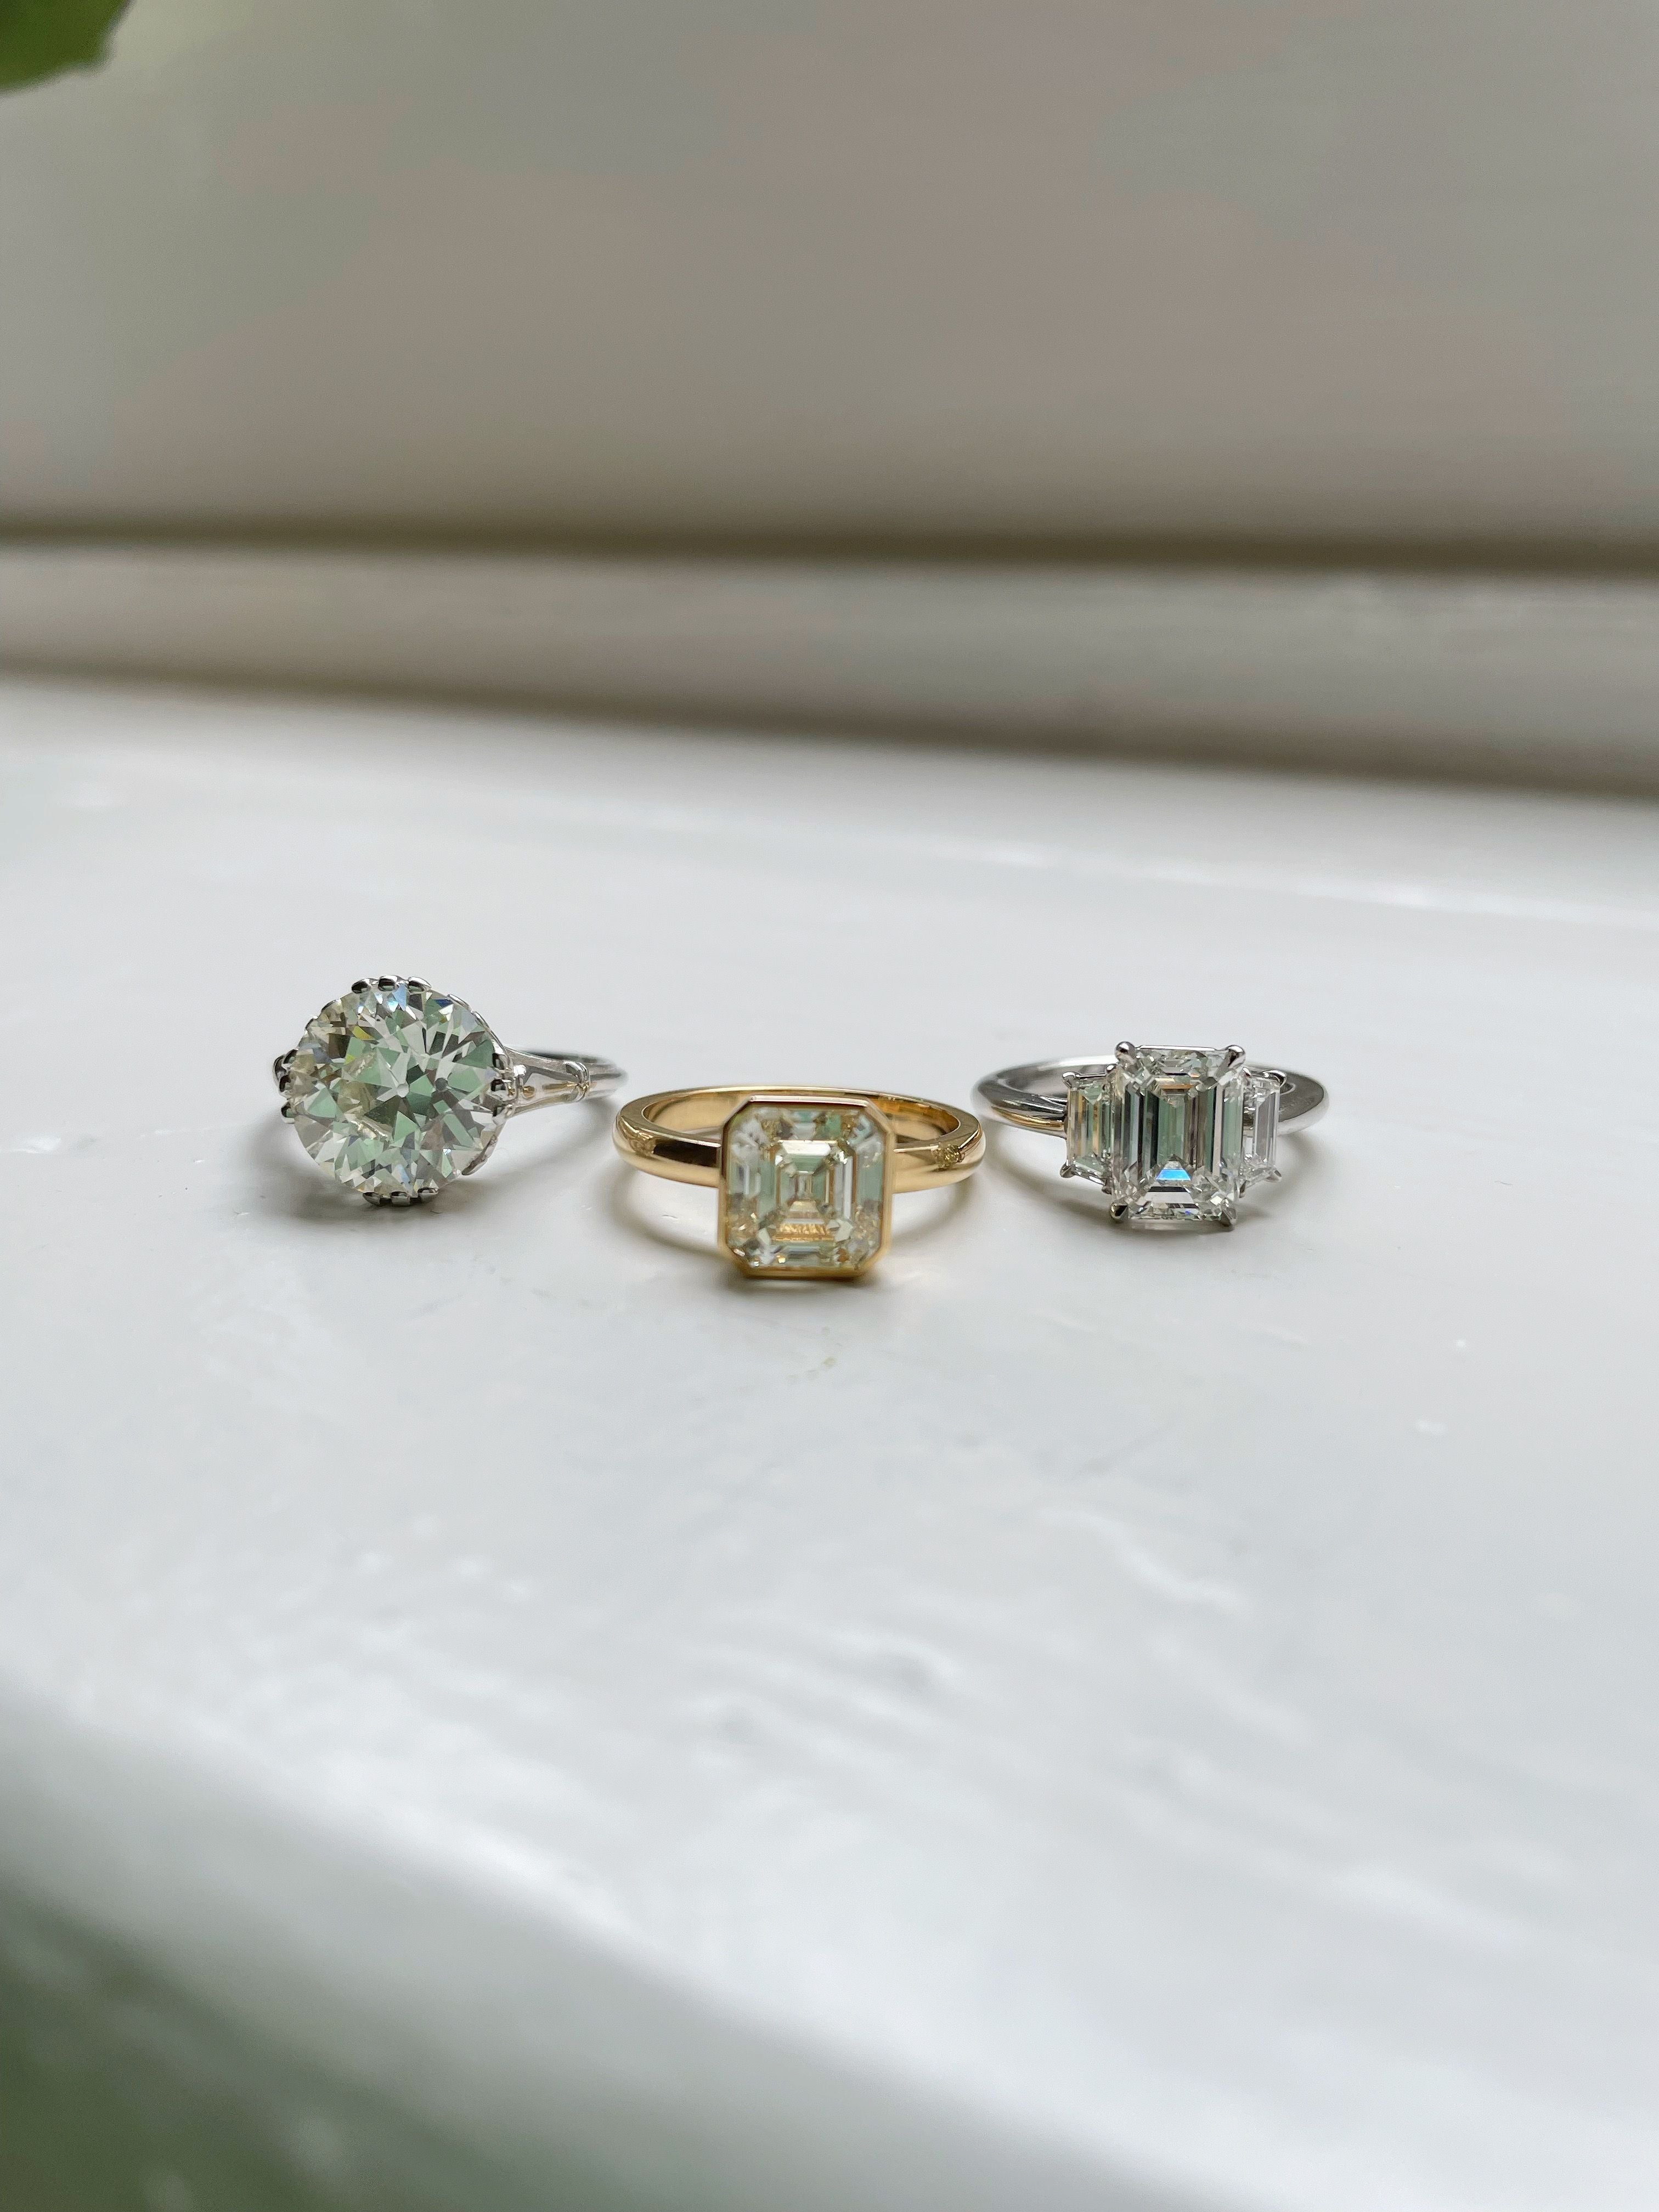 3 Engagement Rings We Love Right Now